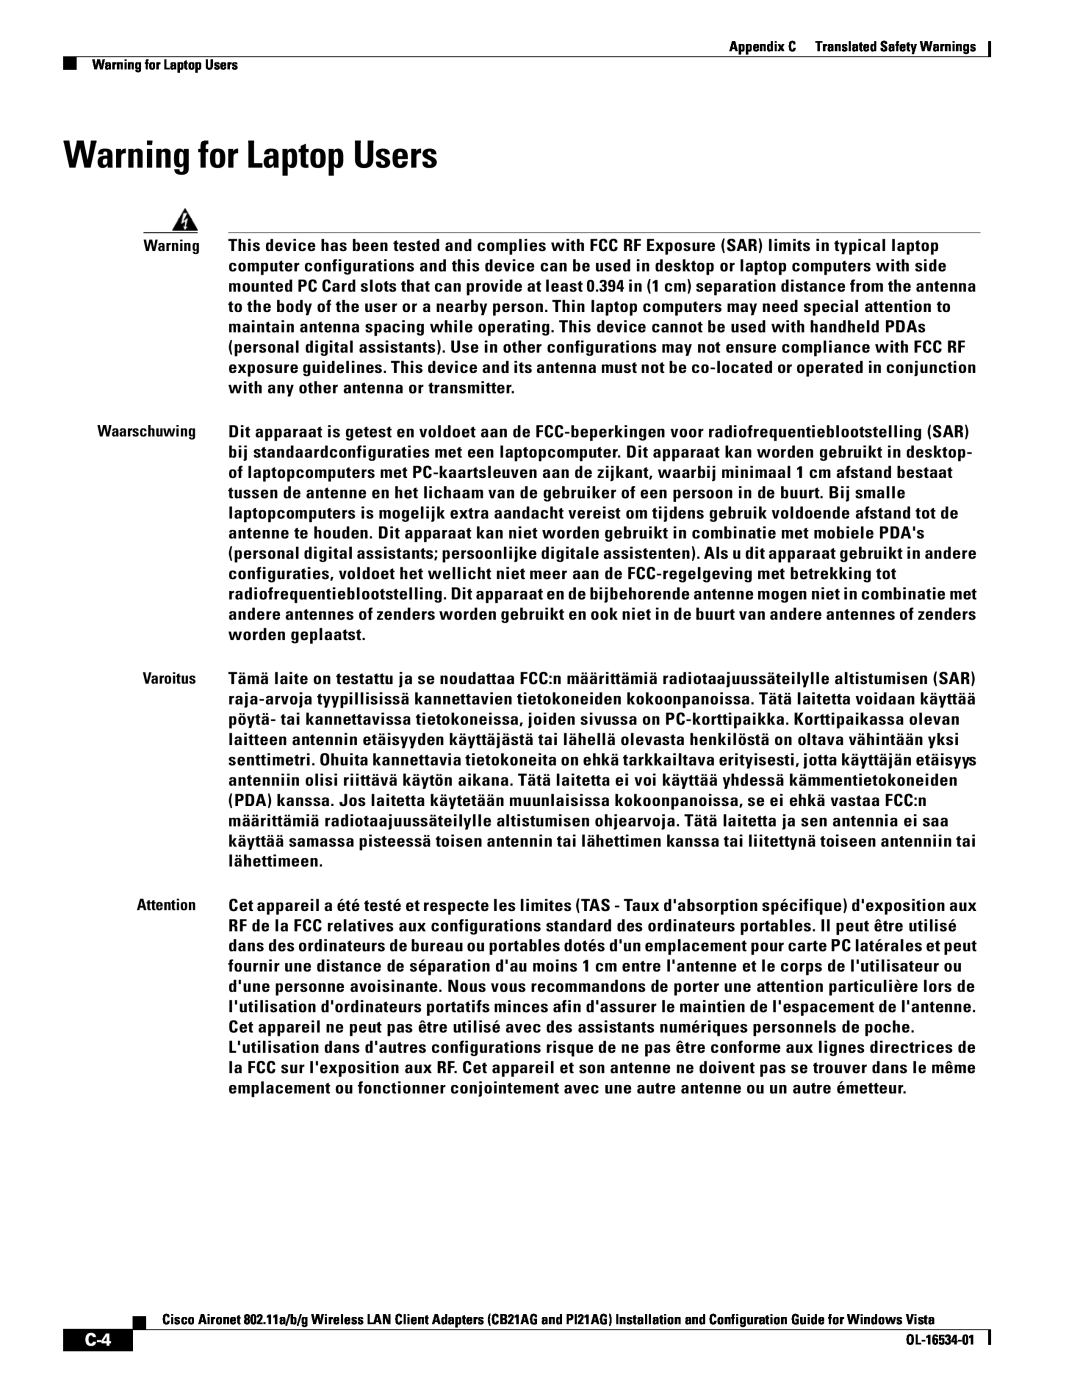 Cisco Systems PI21AG, CB21AG manual Warning for Laptop Users 